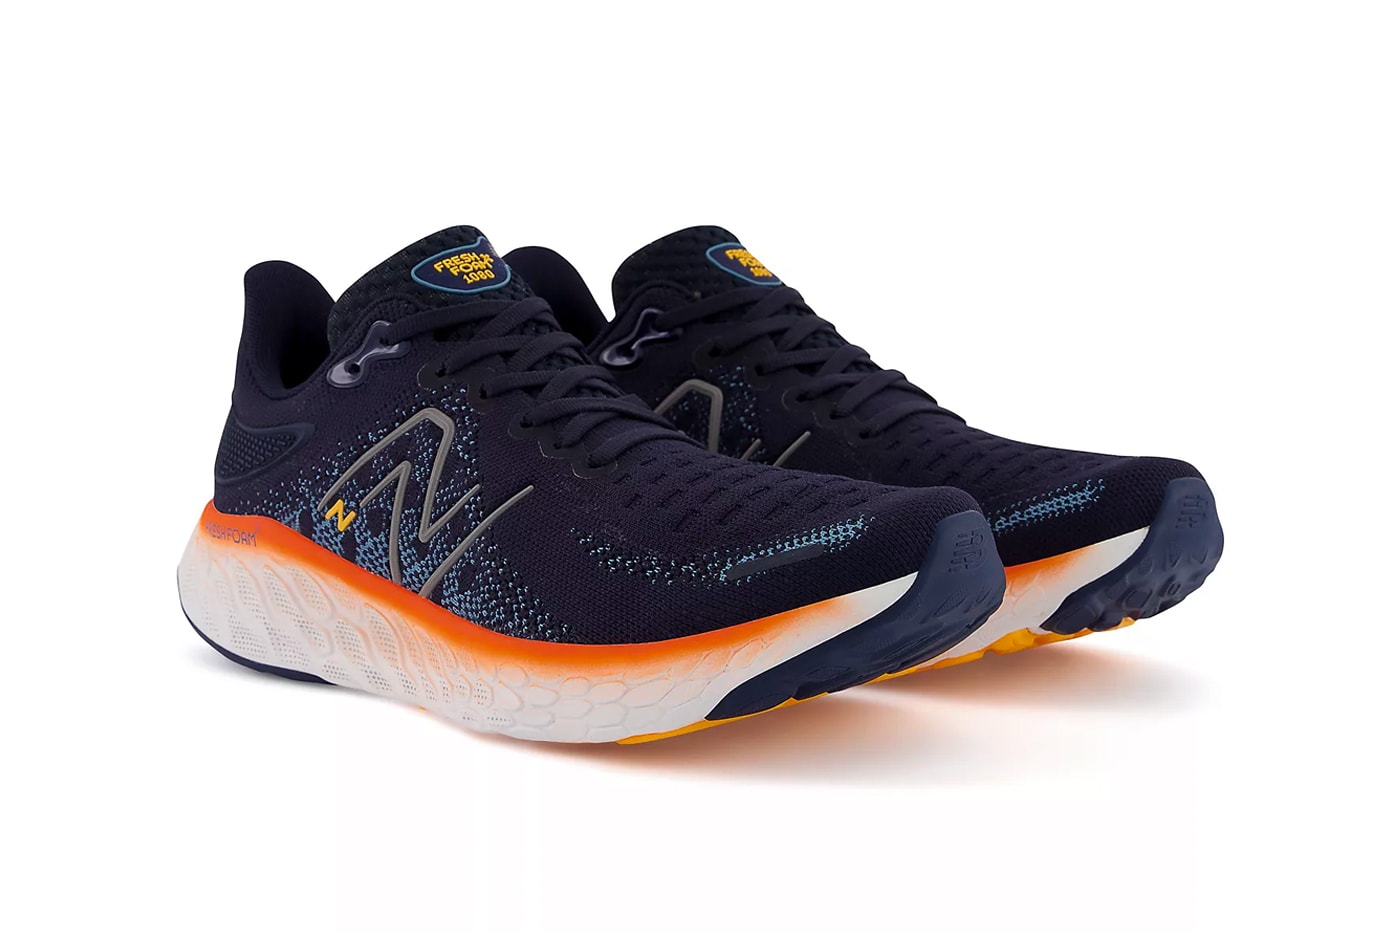 New Balance Fresh Foam X 1080v12 The best running shoes right now